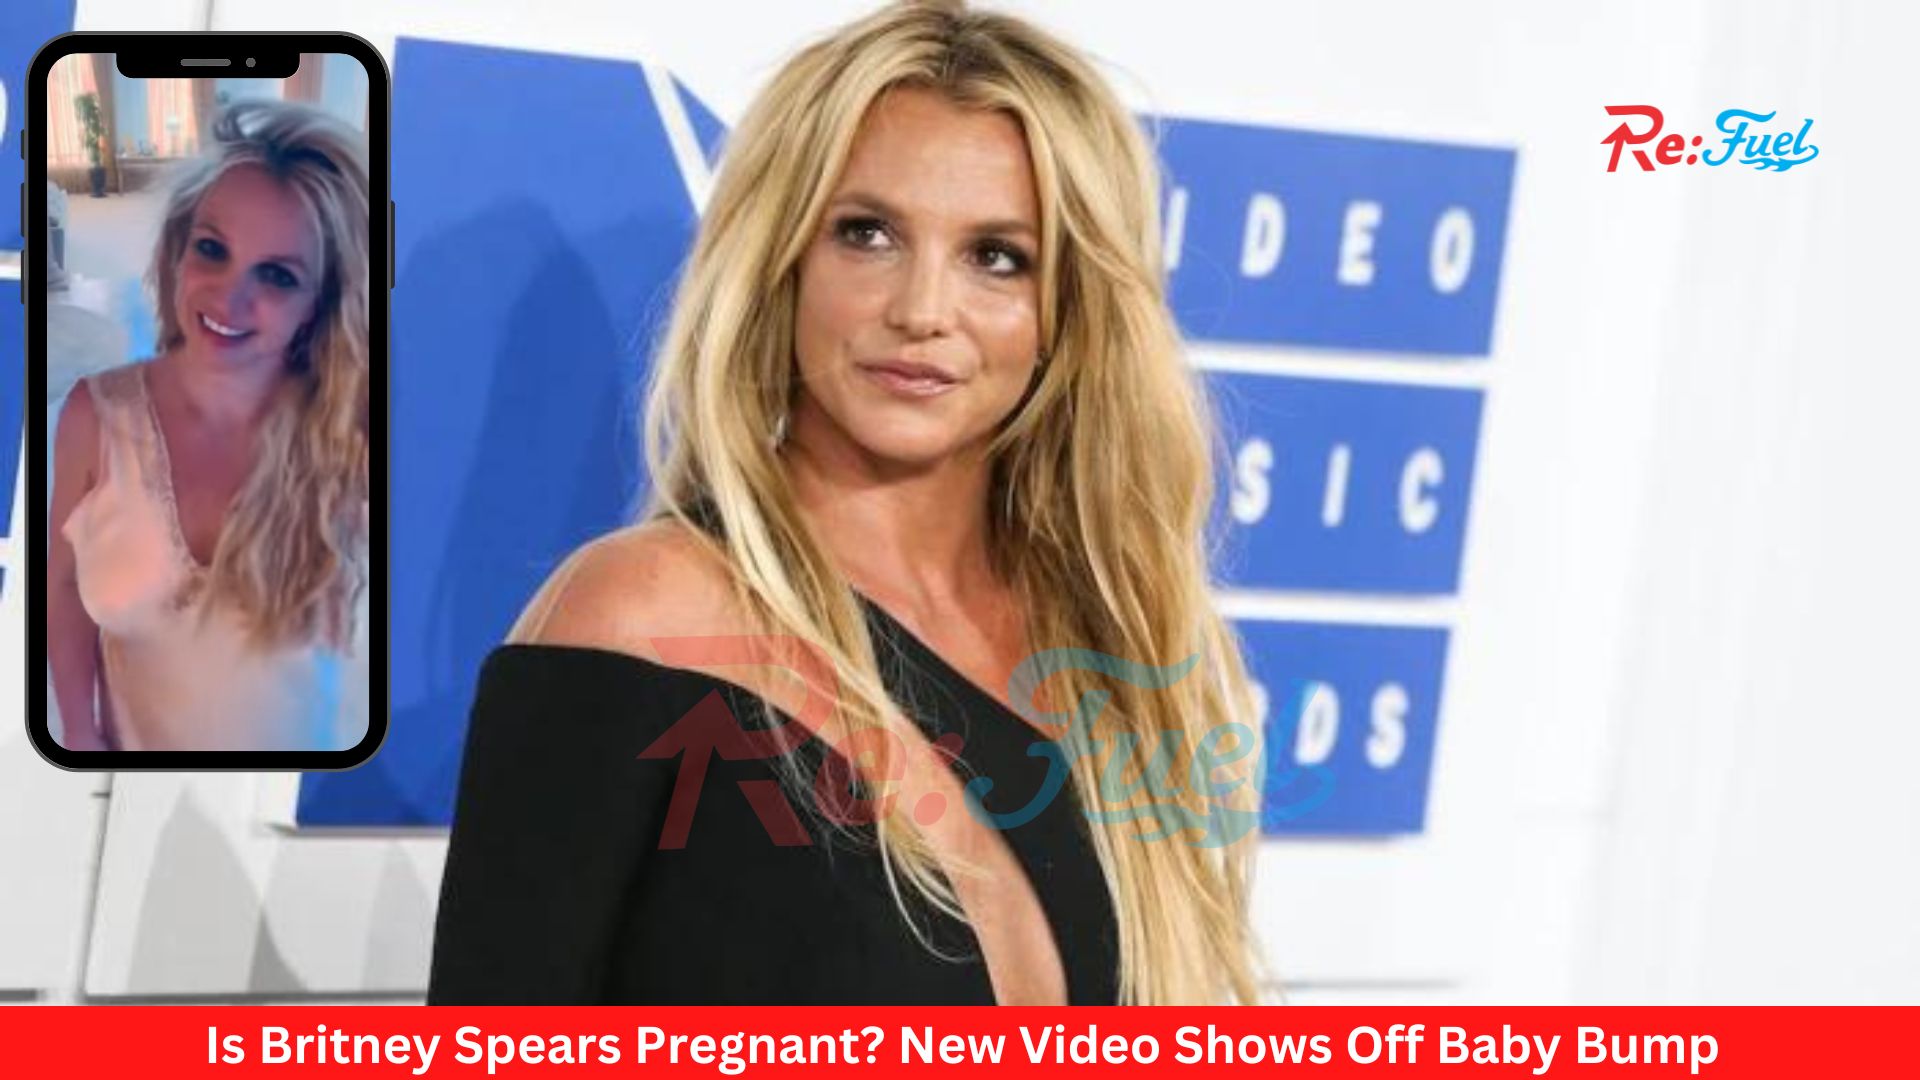 Is Britney Spears Pregnant? New Video Shows Off Baby Bump